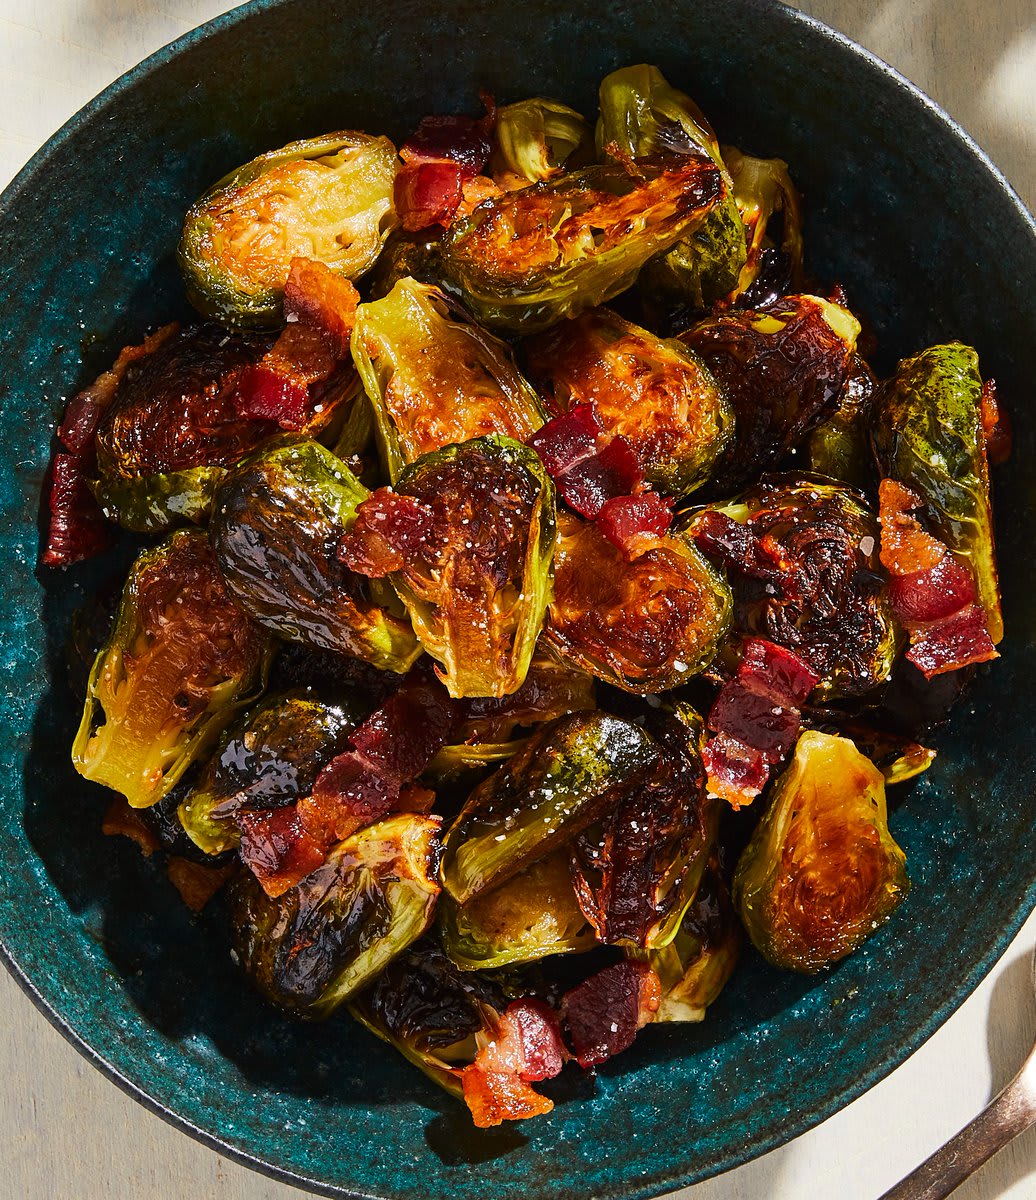 One of the easiest ways to take Brussels sprouts to the next level is to borrow two simple ingredients from the breakfast table: maple syrup and bacon. The combination is sweet, salty, smoky, and earthy: